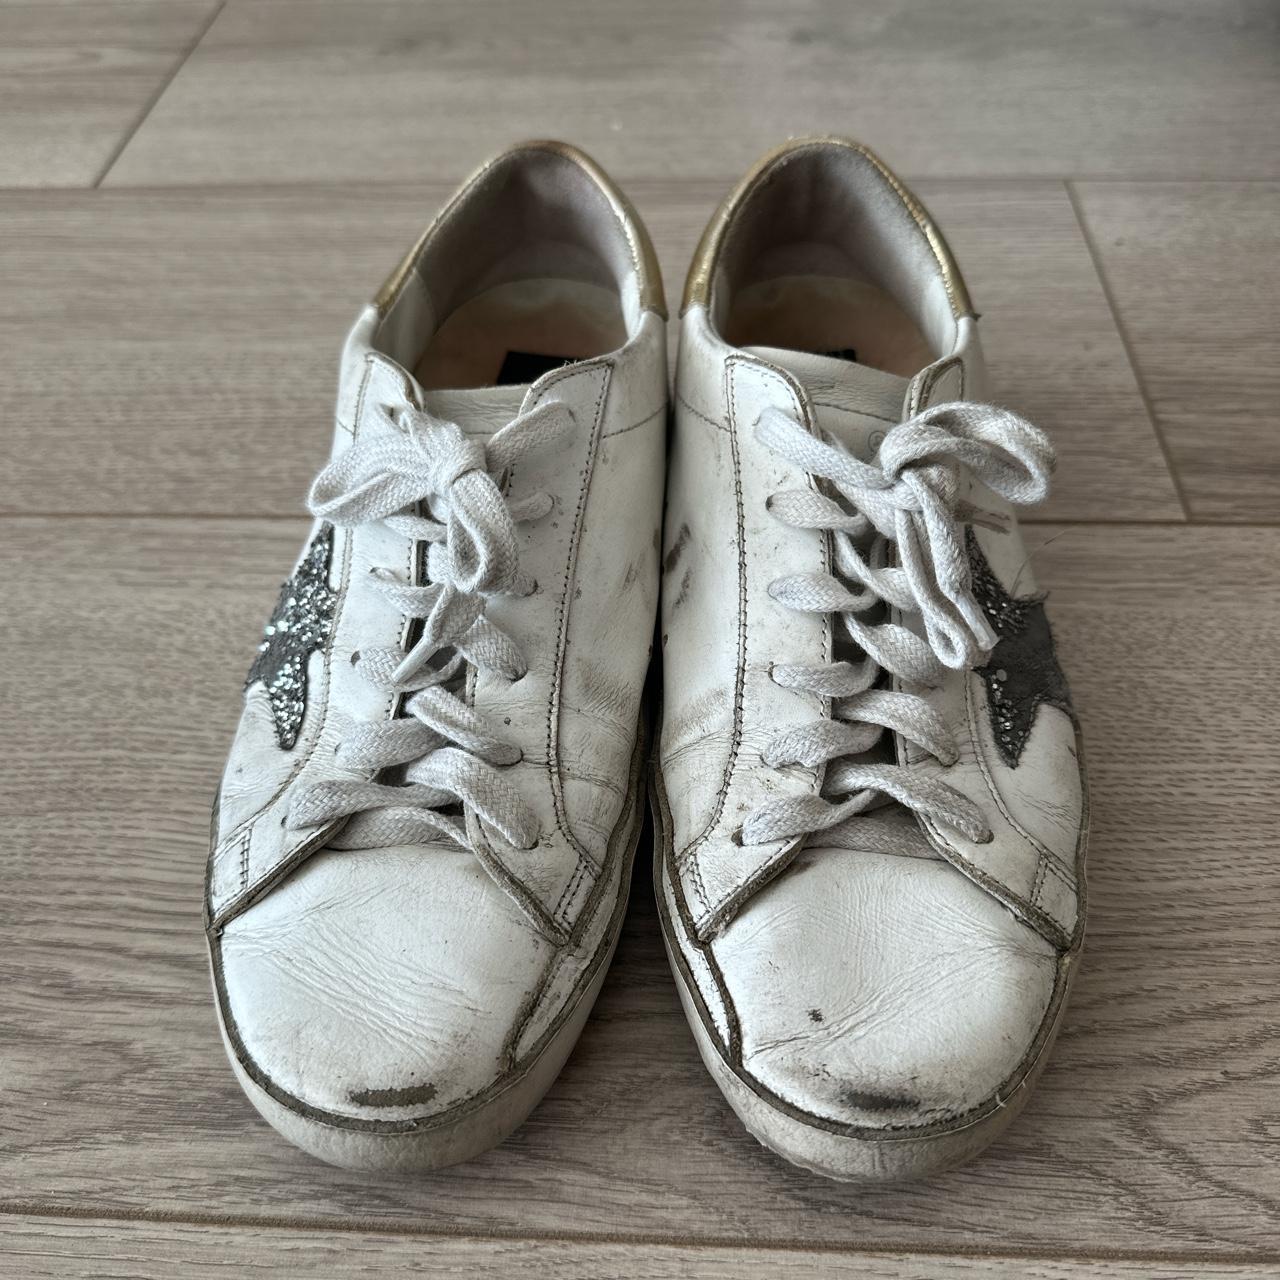 Golden Goose Women's White and Cream Trainers (2)